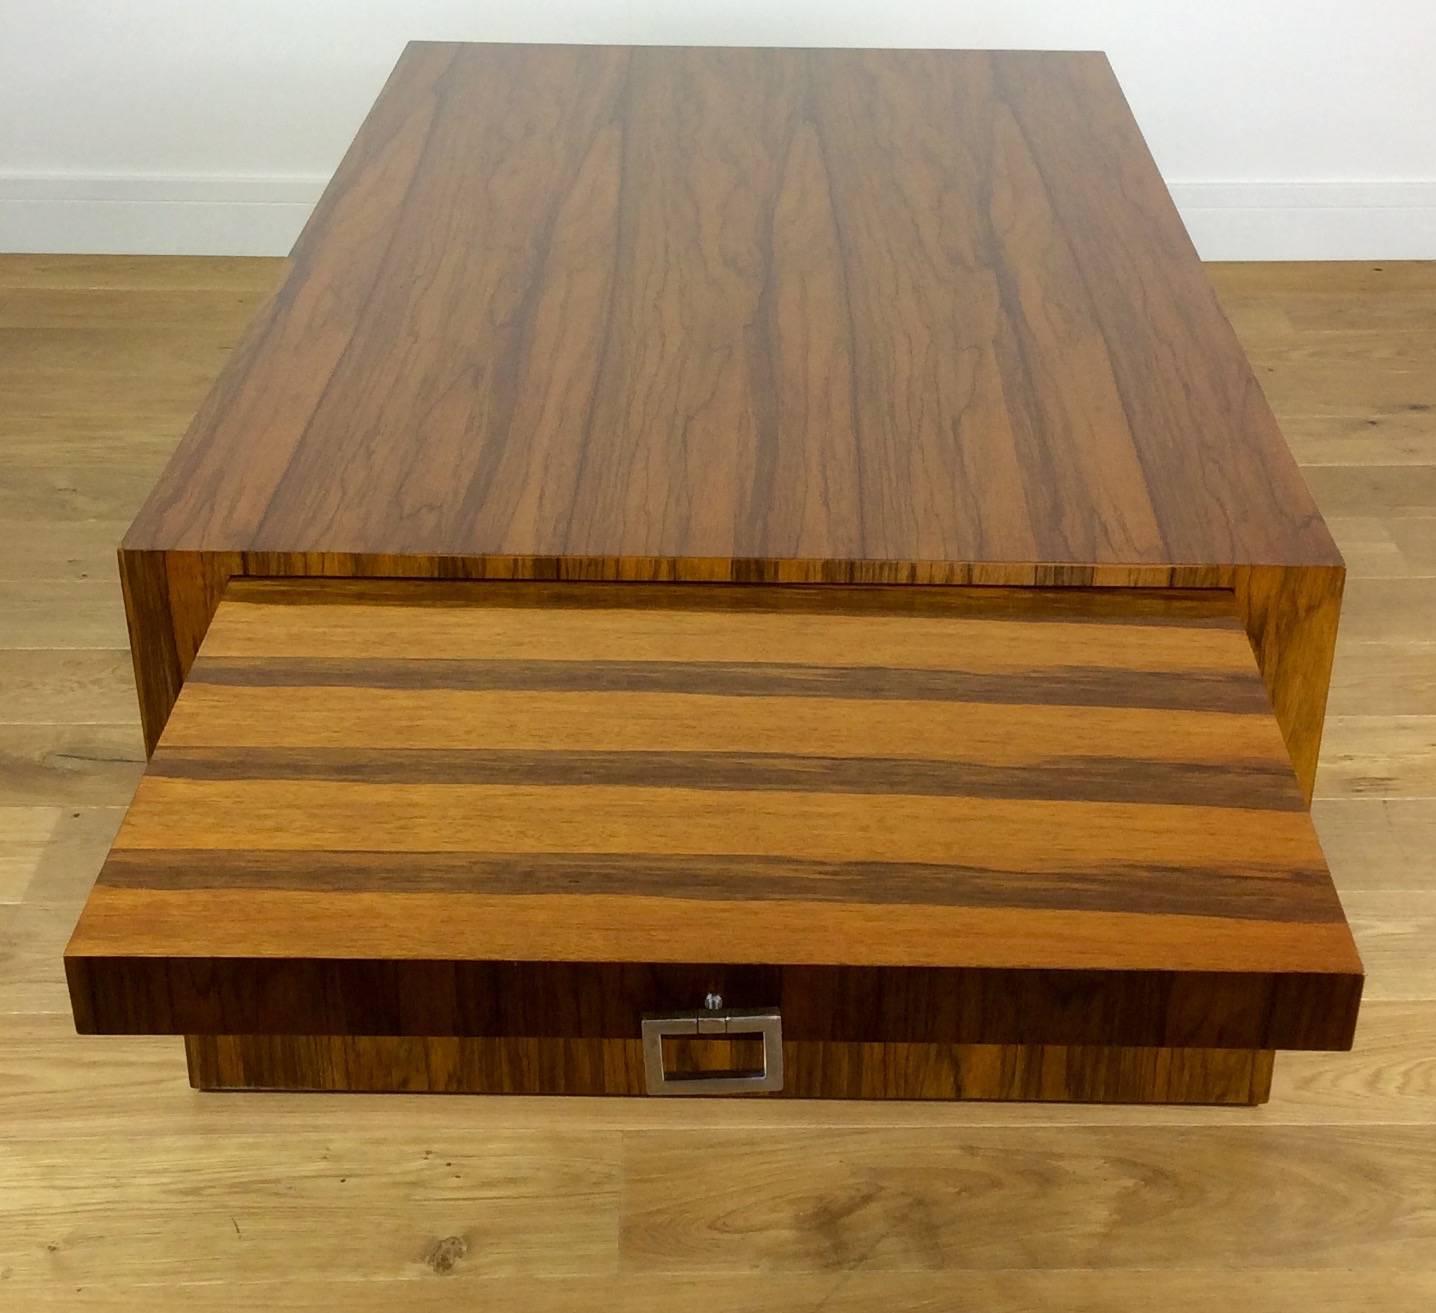 Mid-20th century modern design rosewood table.
This stunning large rosewood low extendable table has pull-out shelves either side, beautiful Brazilian rosewood,
Danish, circa 1960.
H 48.5- W 148- D 86.5 cm each pull-out shelf is 44.5.